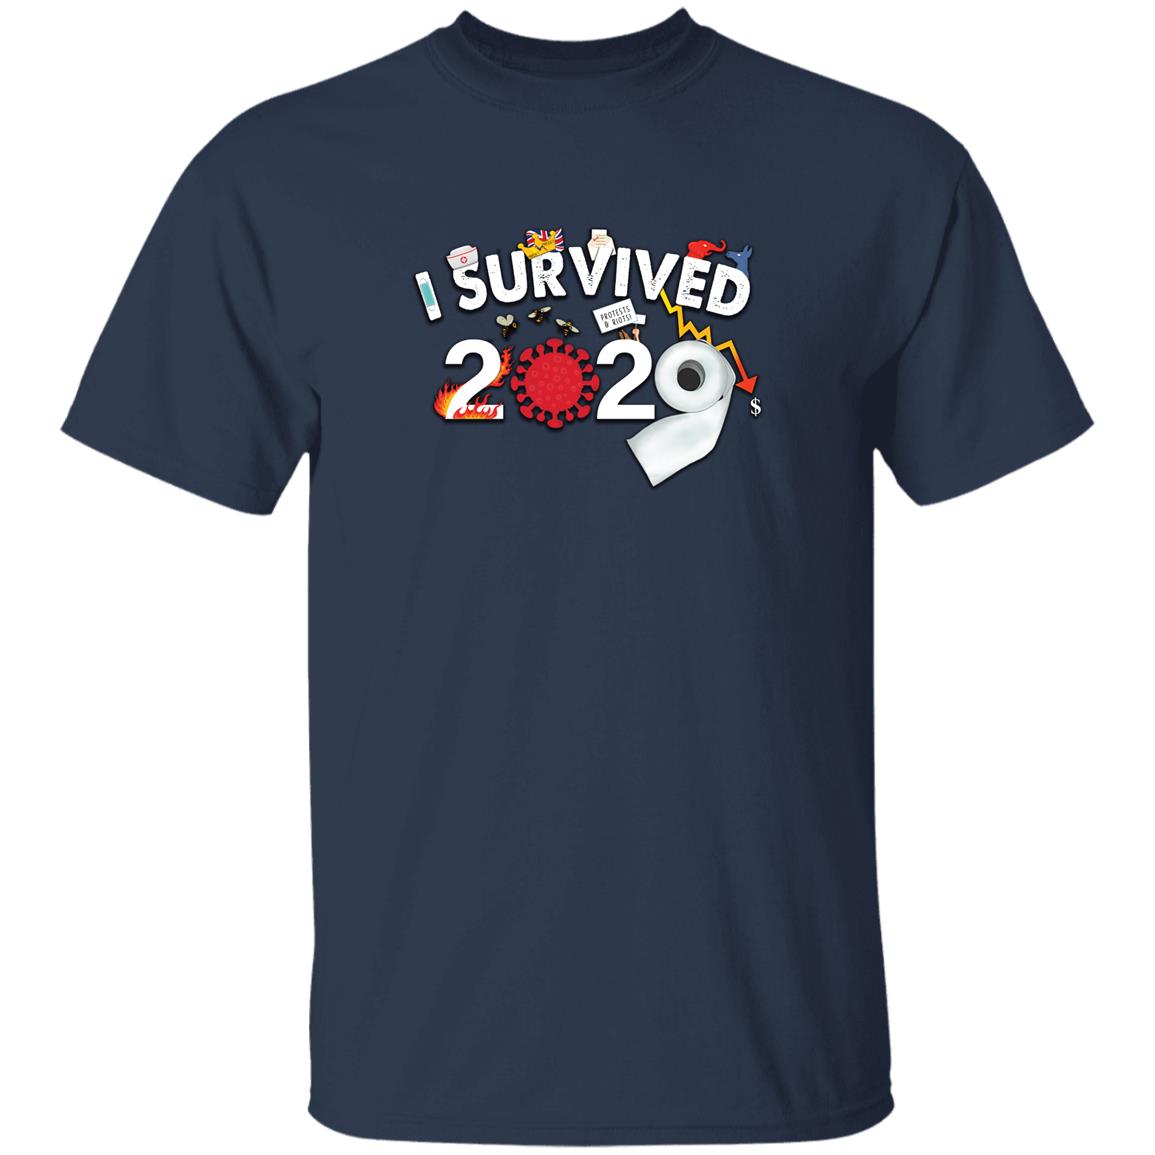 I Survived 2020 - Youth 100% Cotton T-Shirt